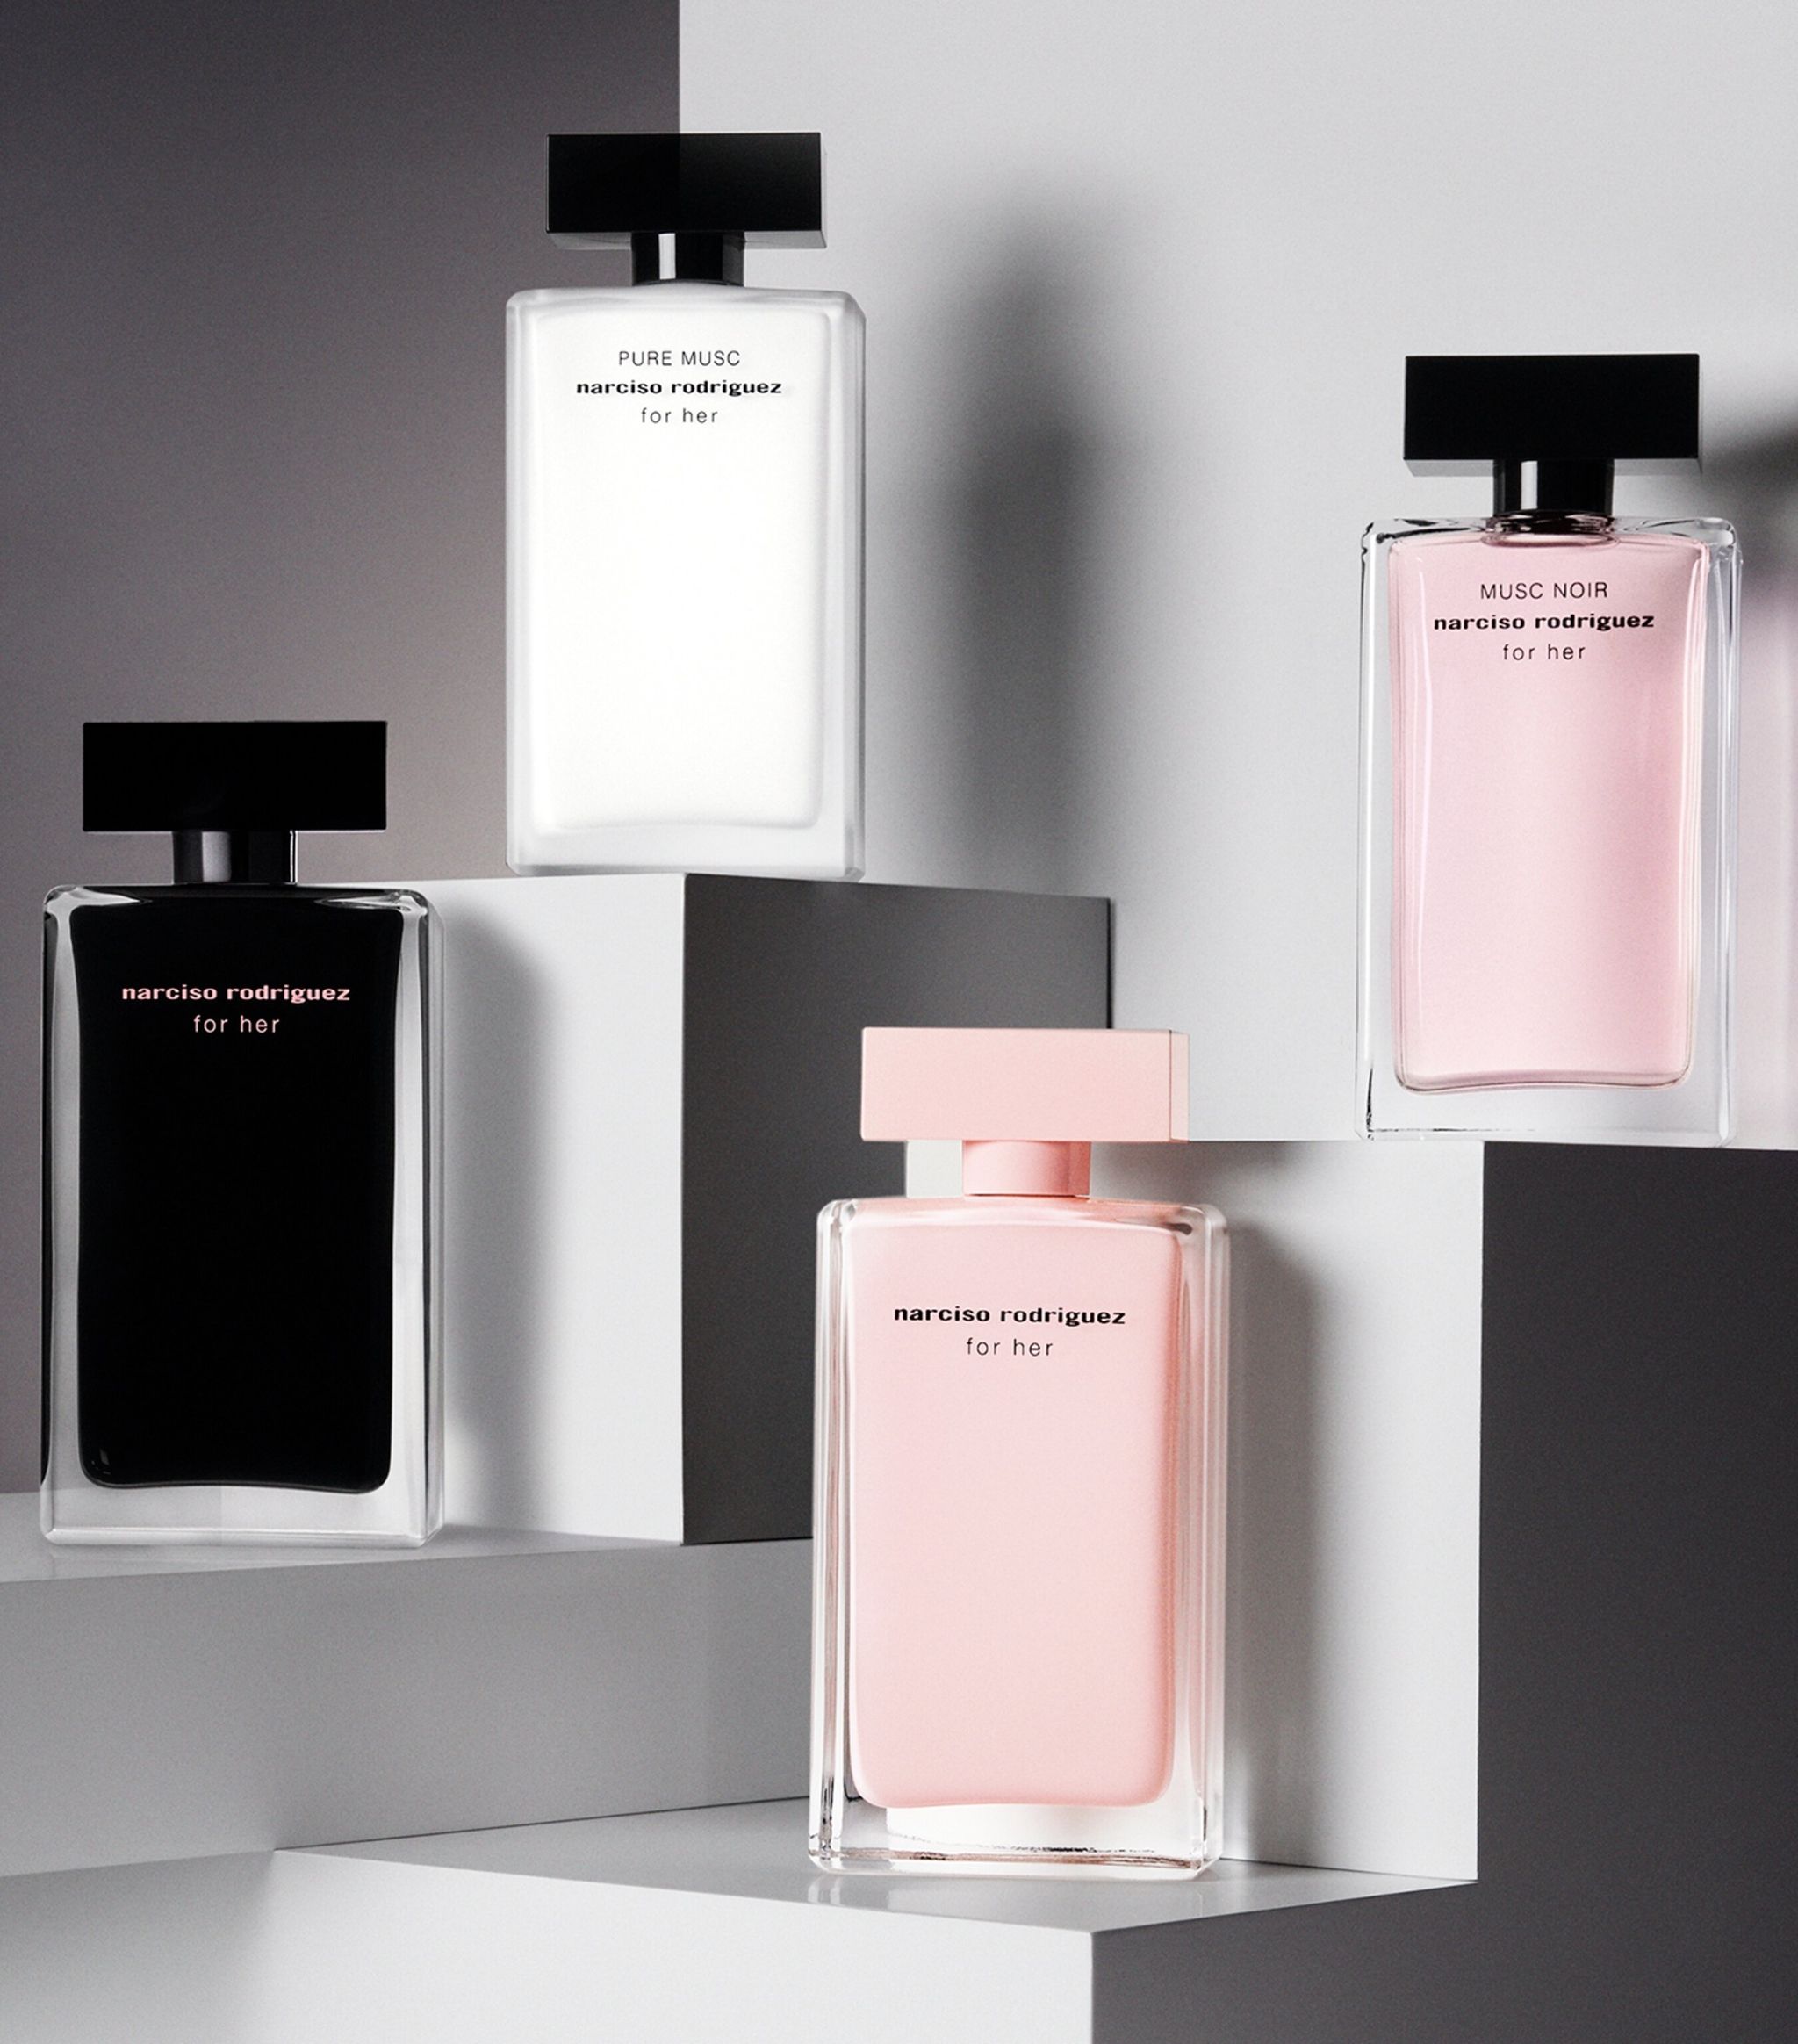 NƯỚC HOA NARCISO RODRIGUEZ FOR HER EDT 7